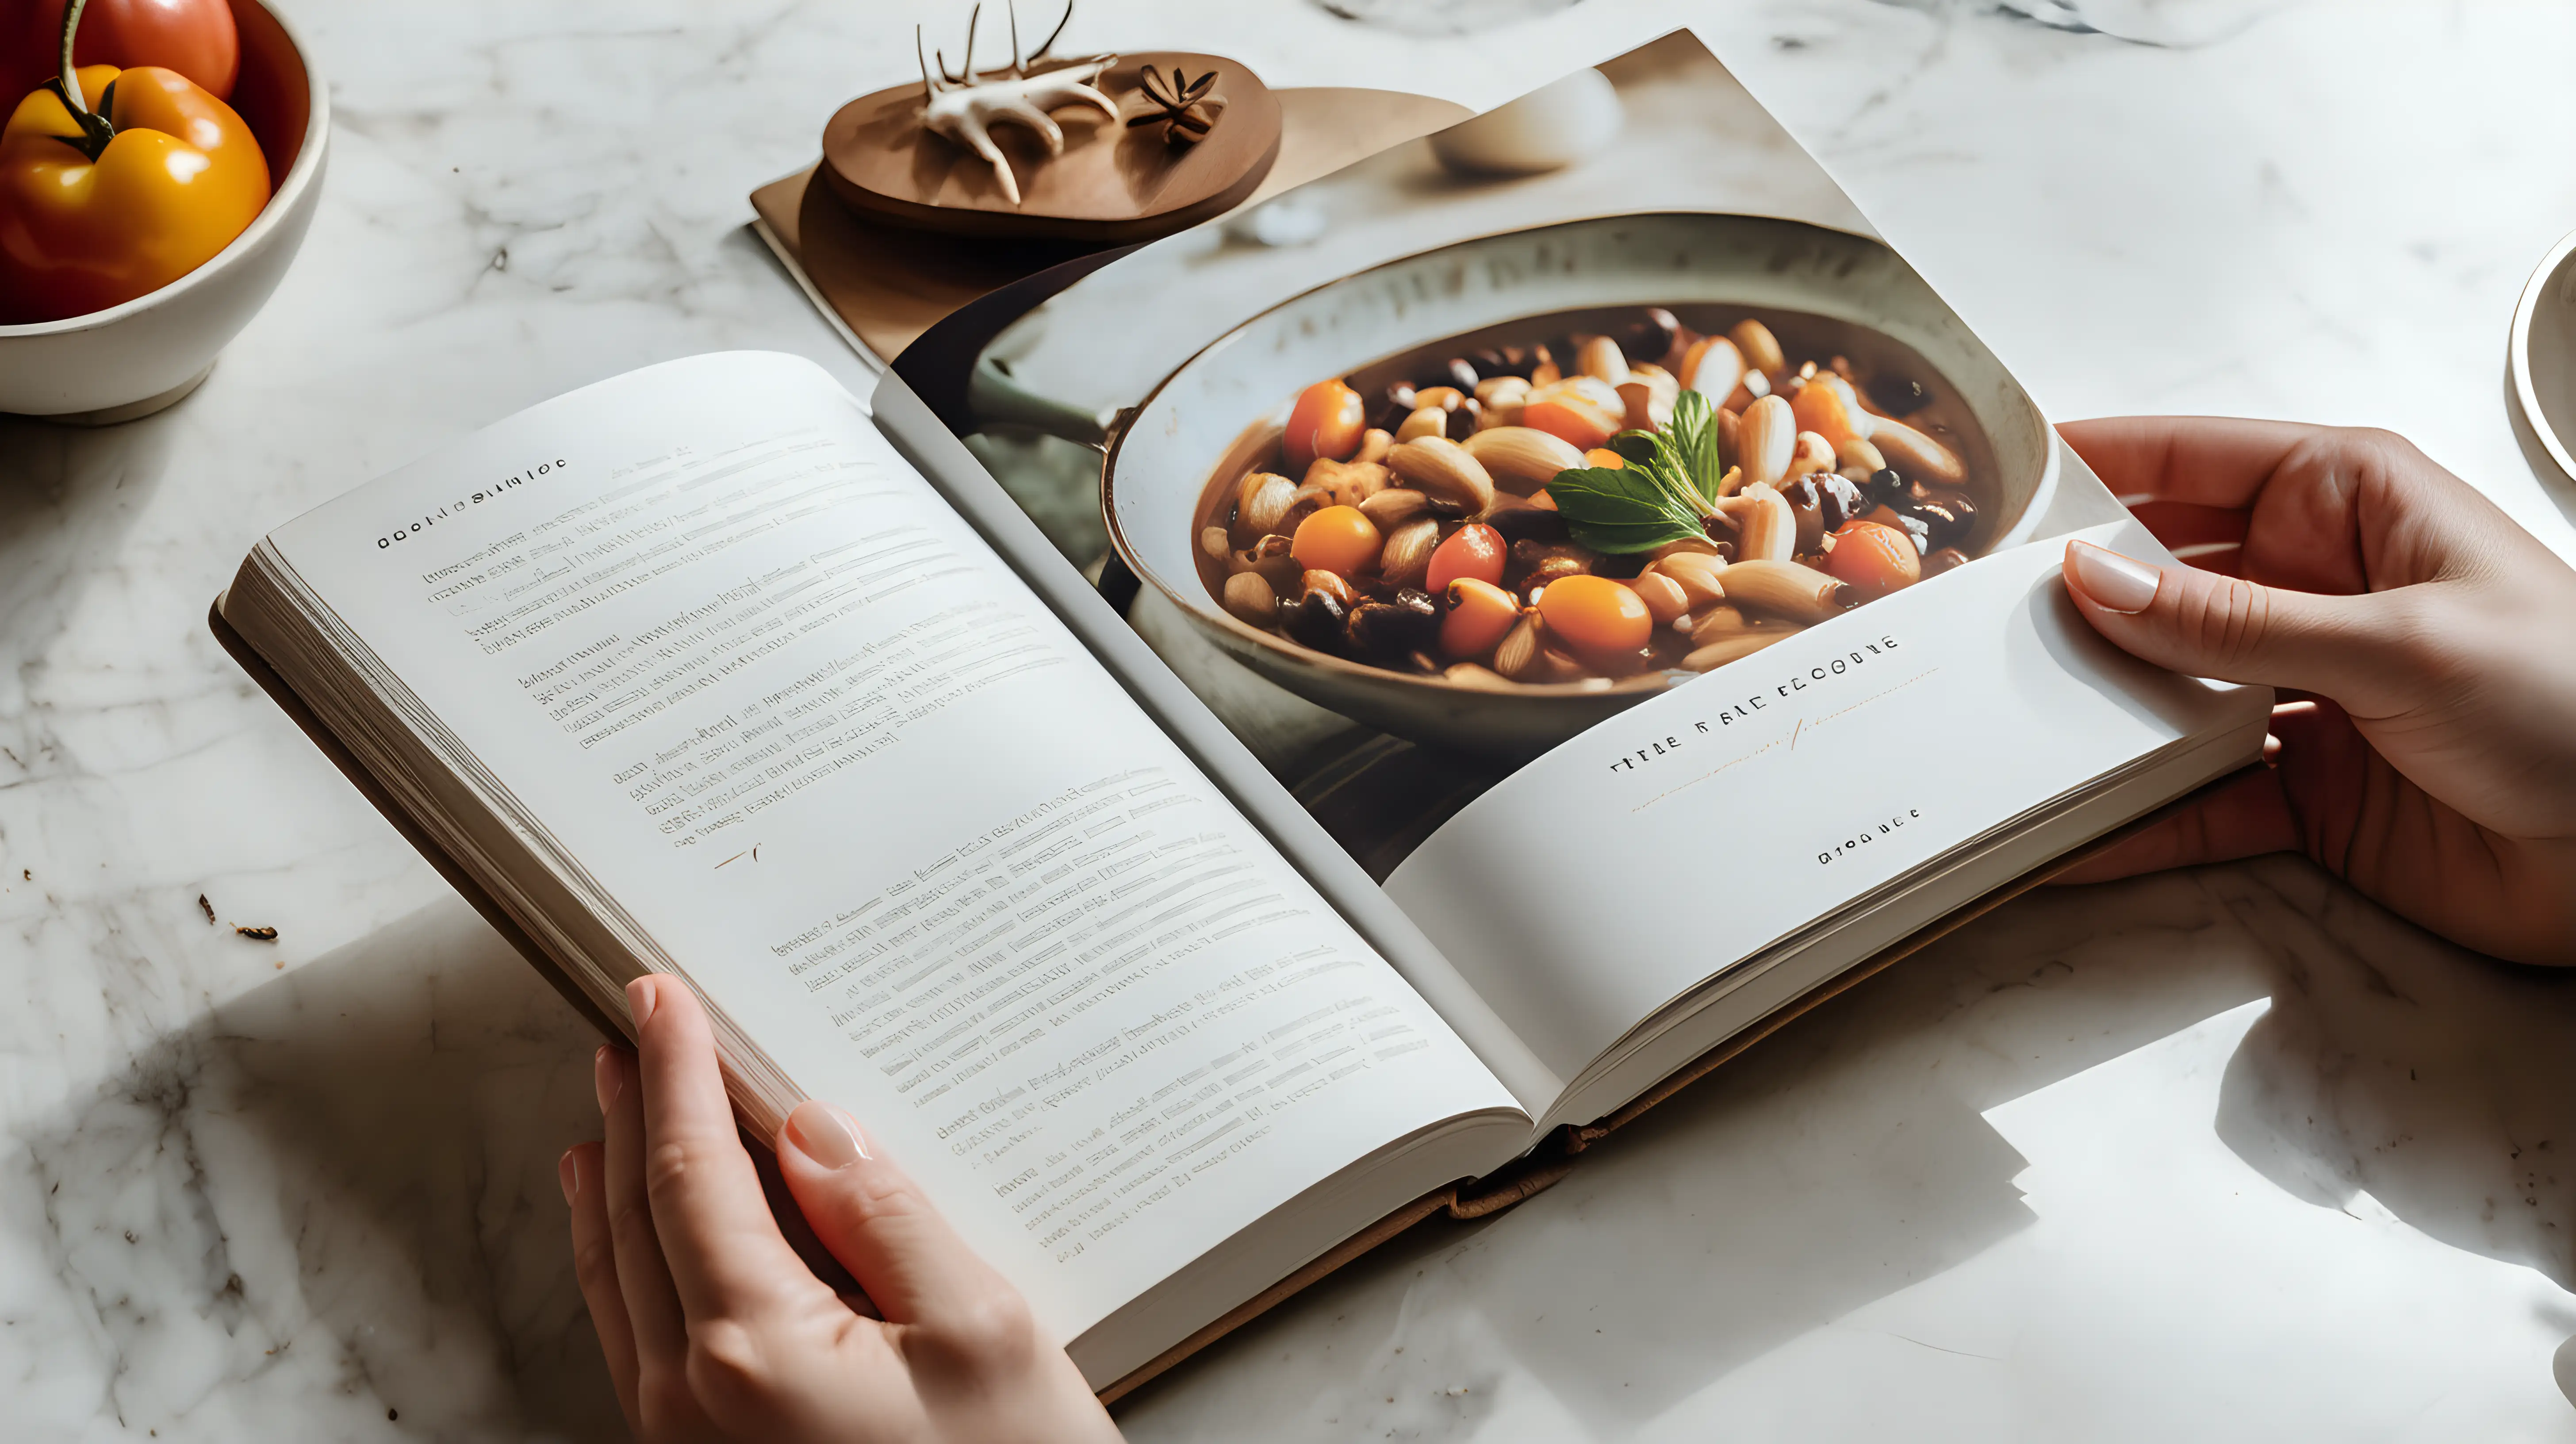 A person's hands holding a cookbook, with glimpses of delicious recipes and culinary inspiration.